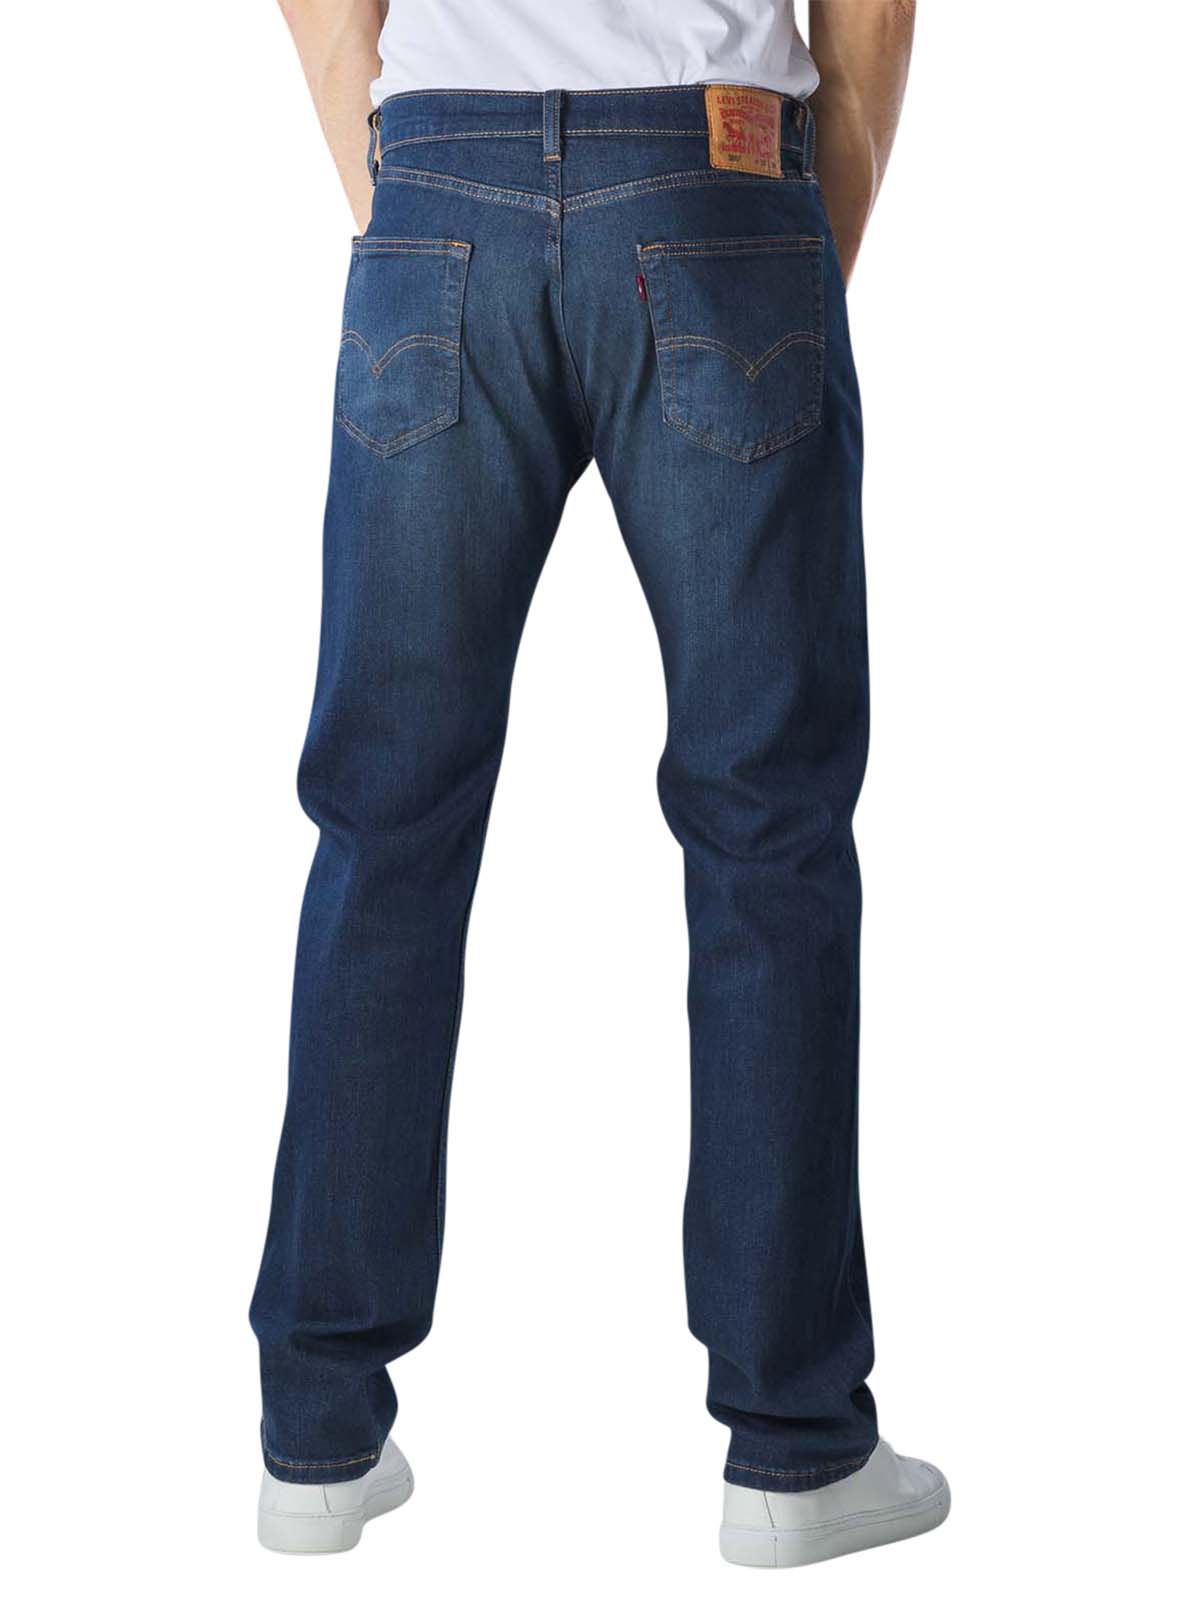 Levi's 505 Jeans Straight Fit roth Levi's Men's Jeans | Free Shipping on   - SIMPLY LOOK GOOD